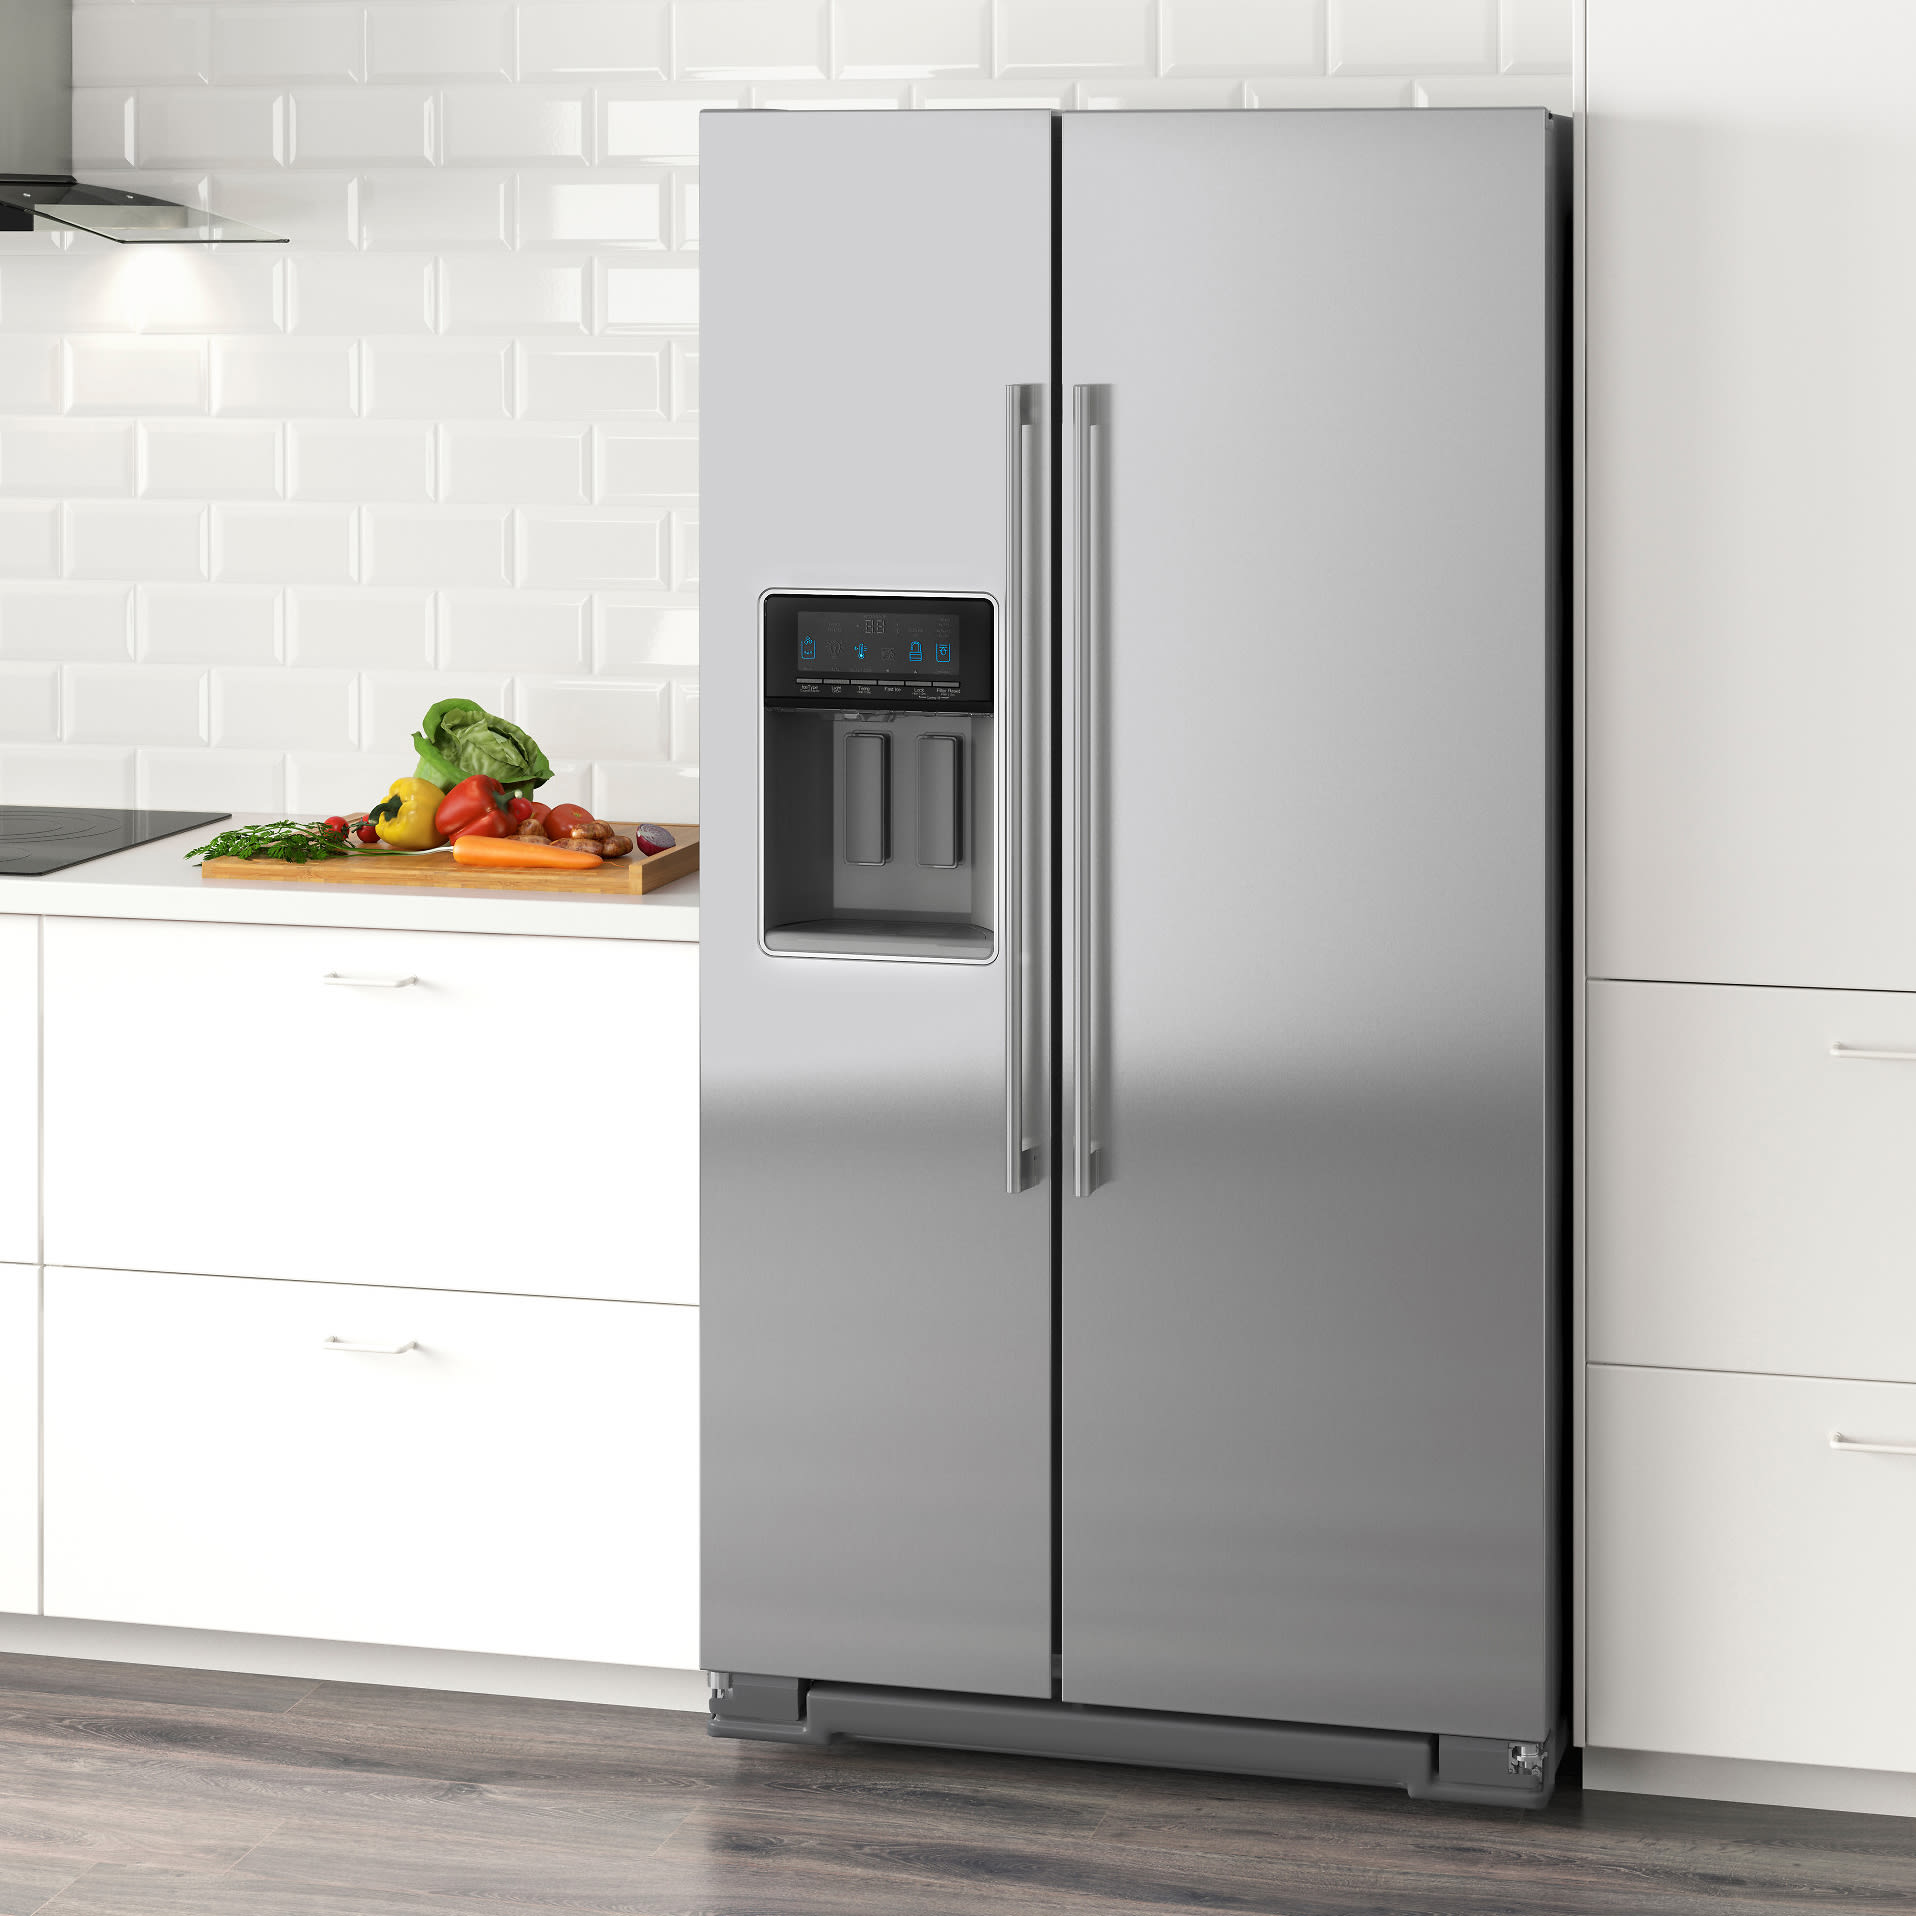 Ikea Appliances Are Their Refrigerators A Good Deal Apartment